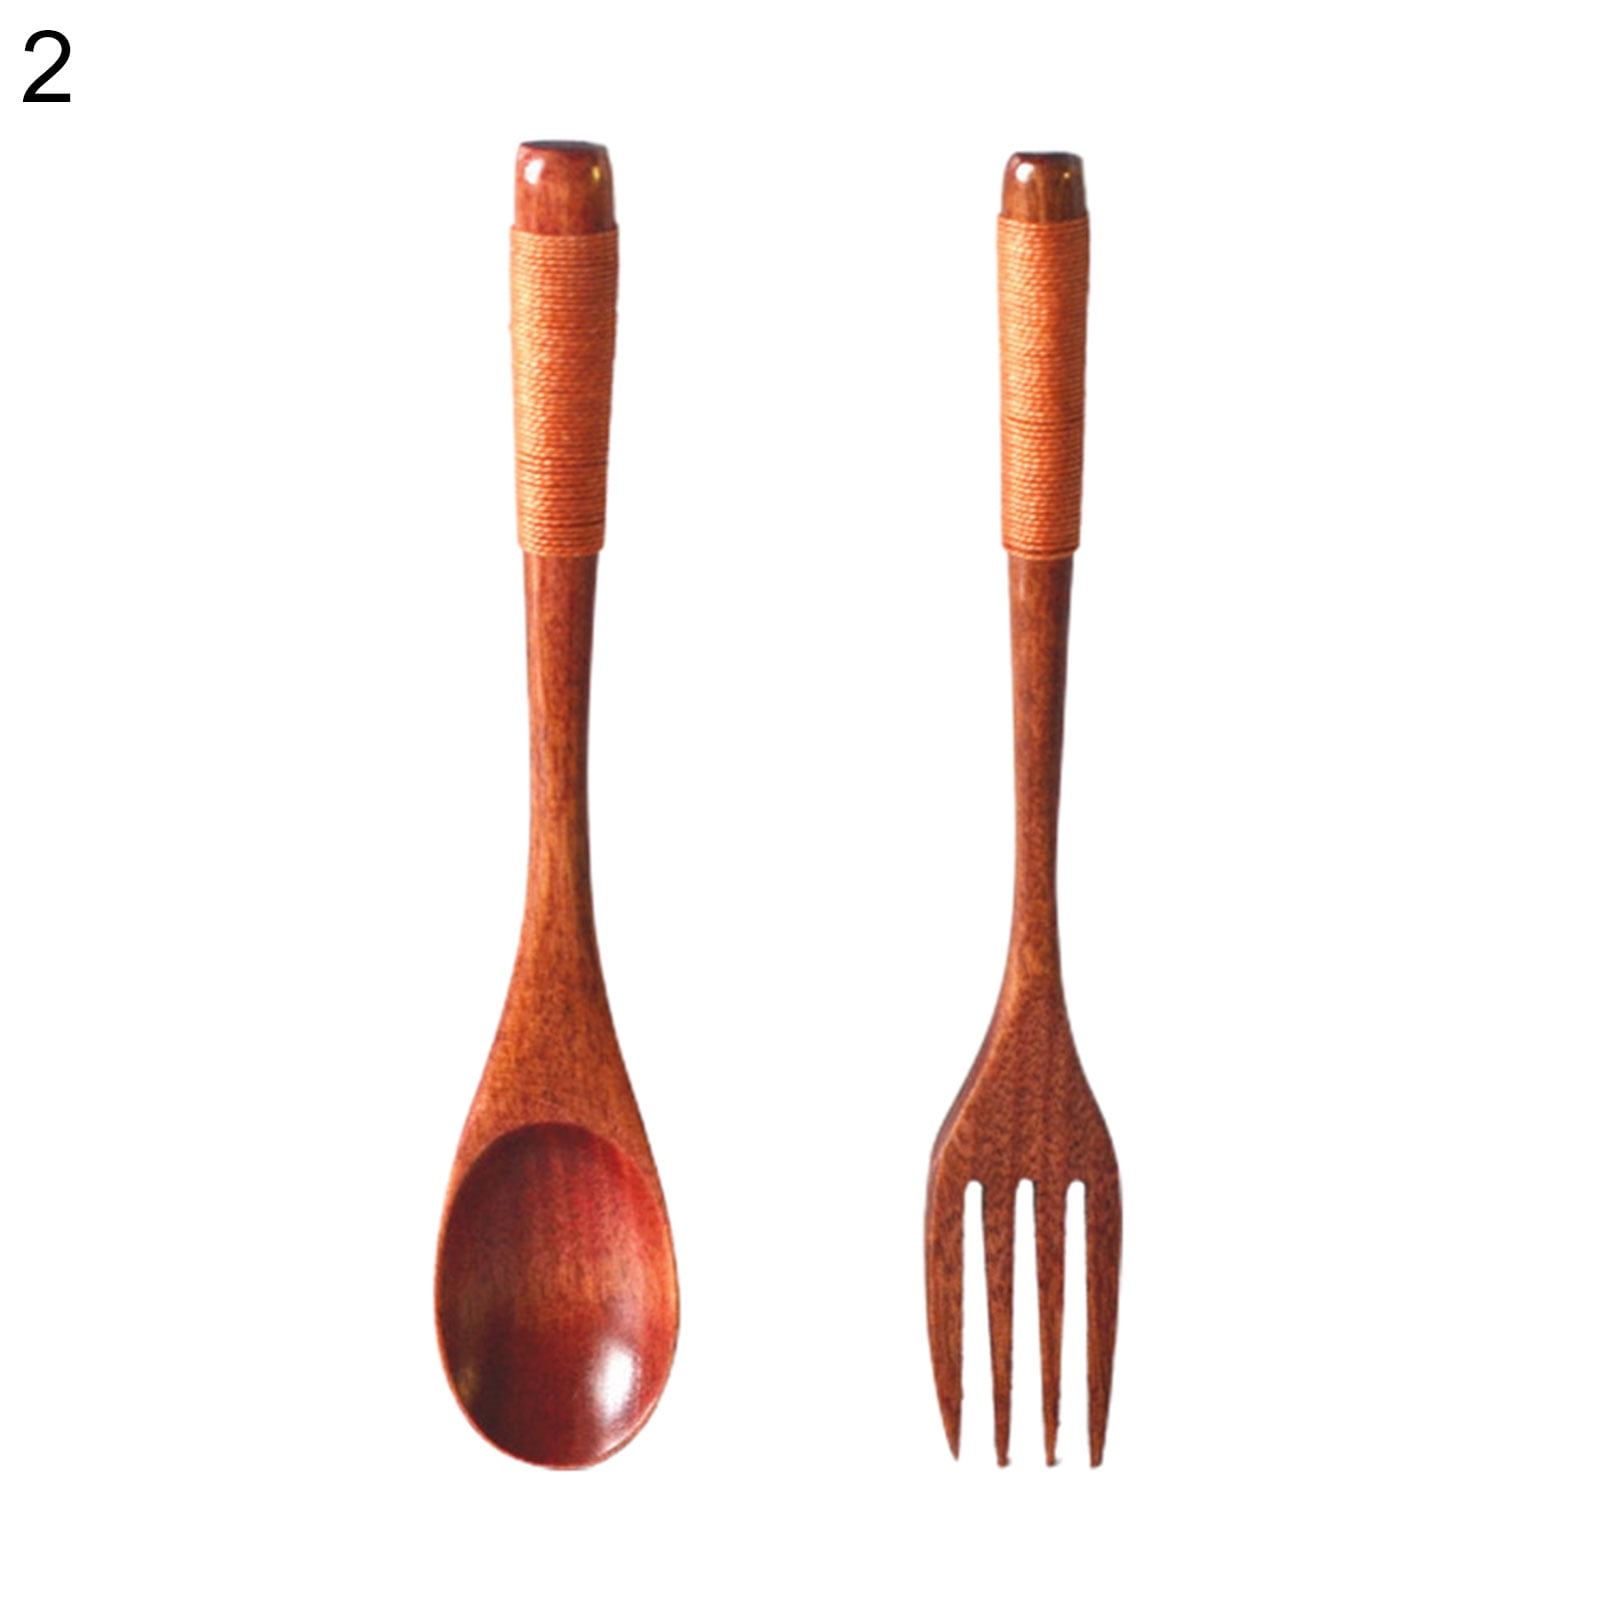 Wooden Long Handle Soup Spoon Honey Stirring Fork Kitchen Cooking Utensil Supply 